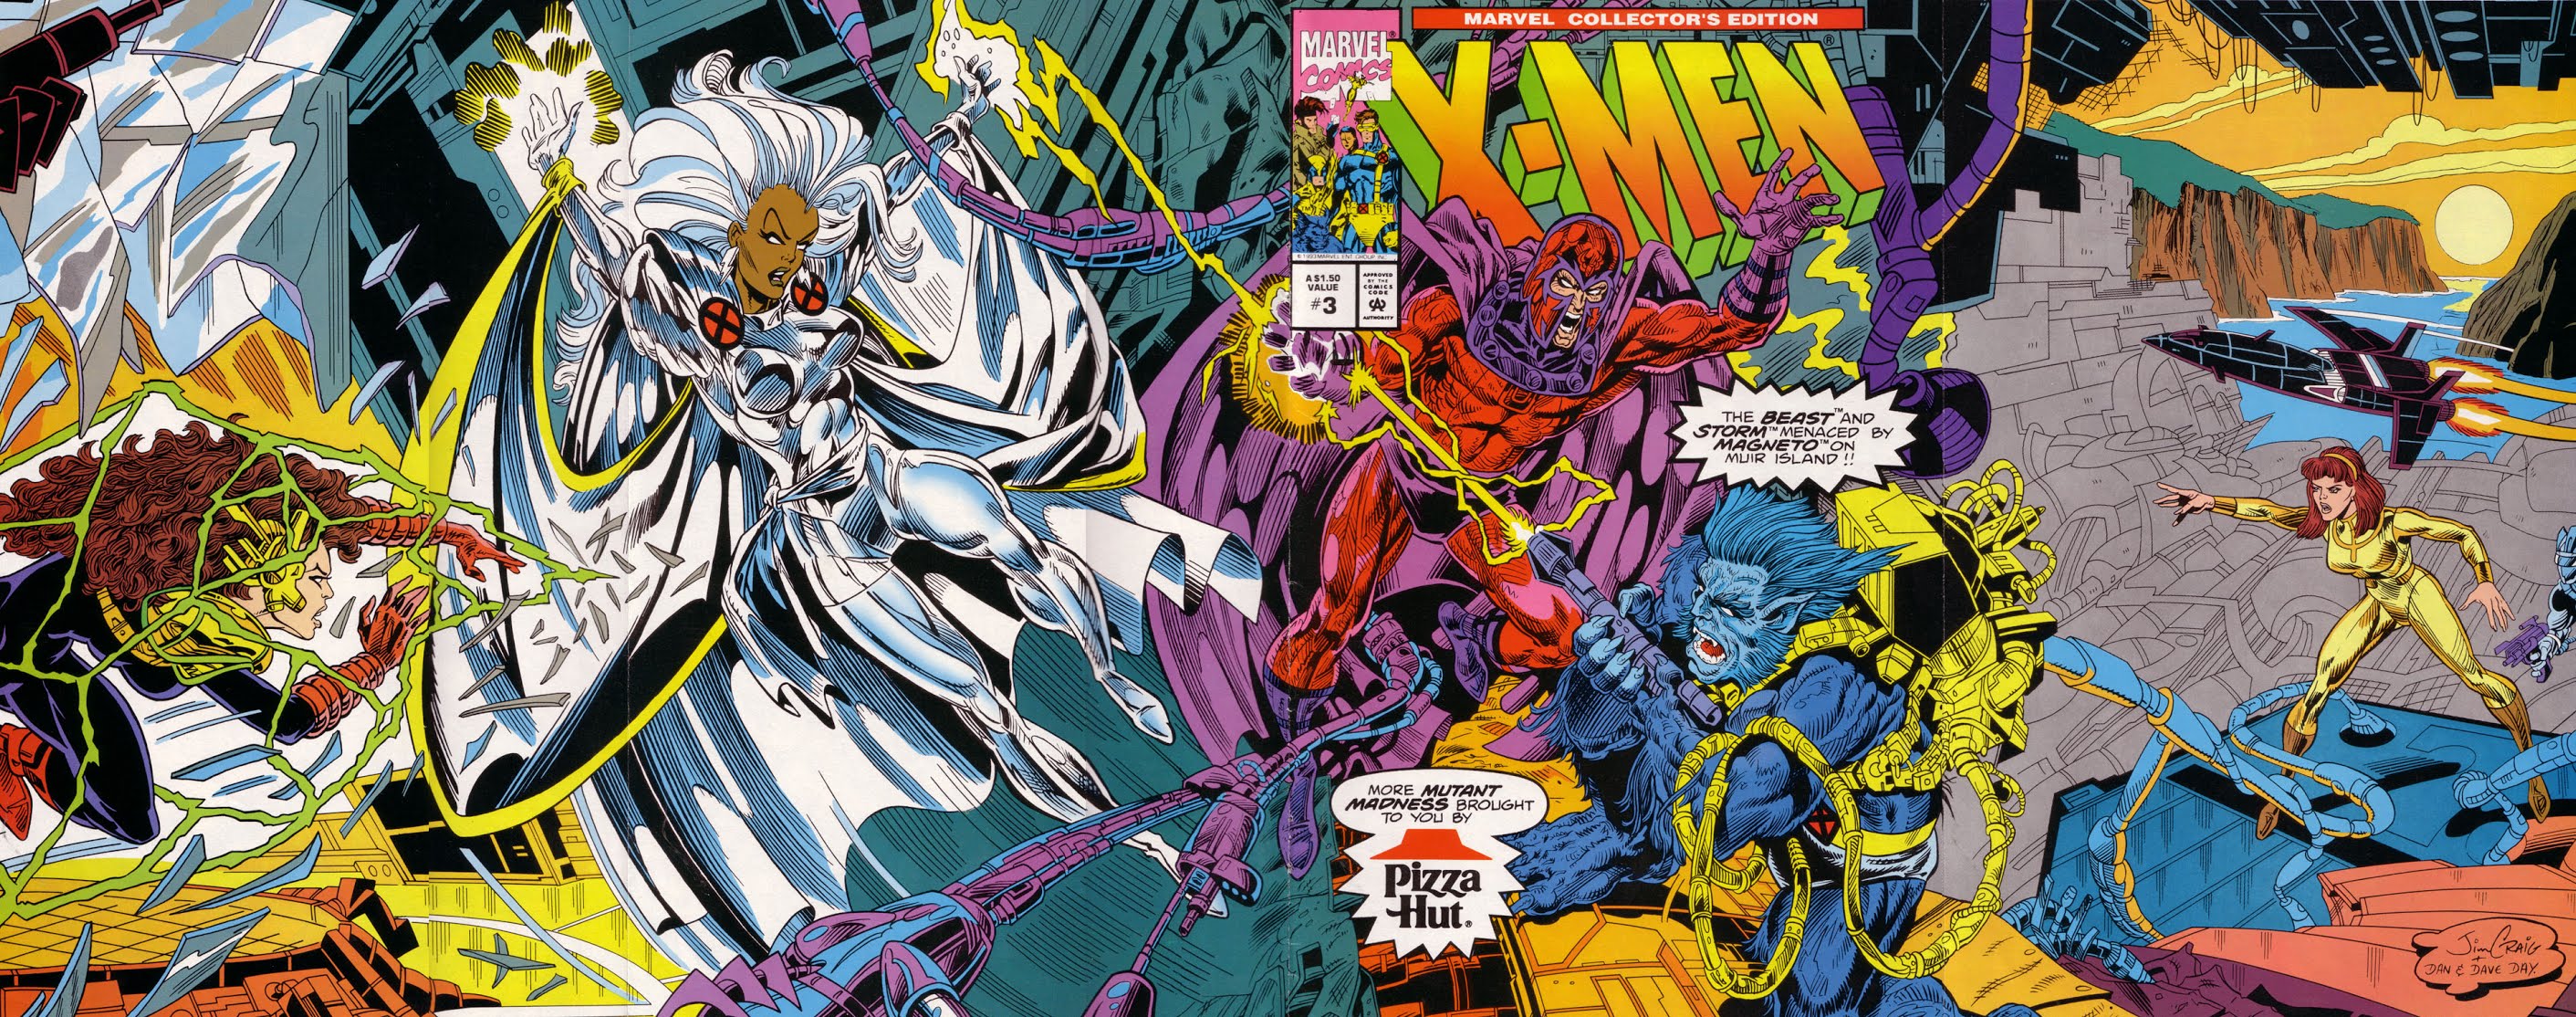 The X-Men Collector's Edition 3 Page 1